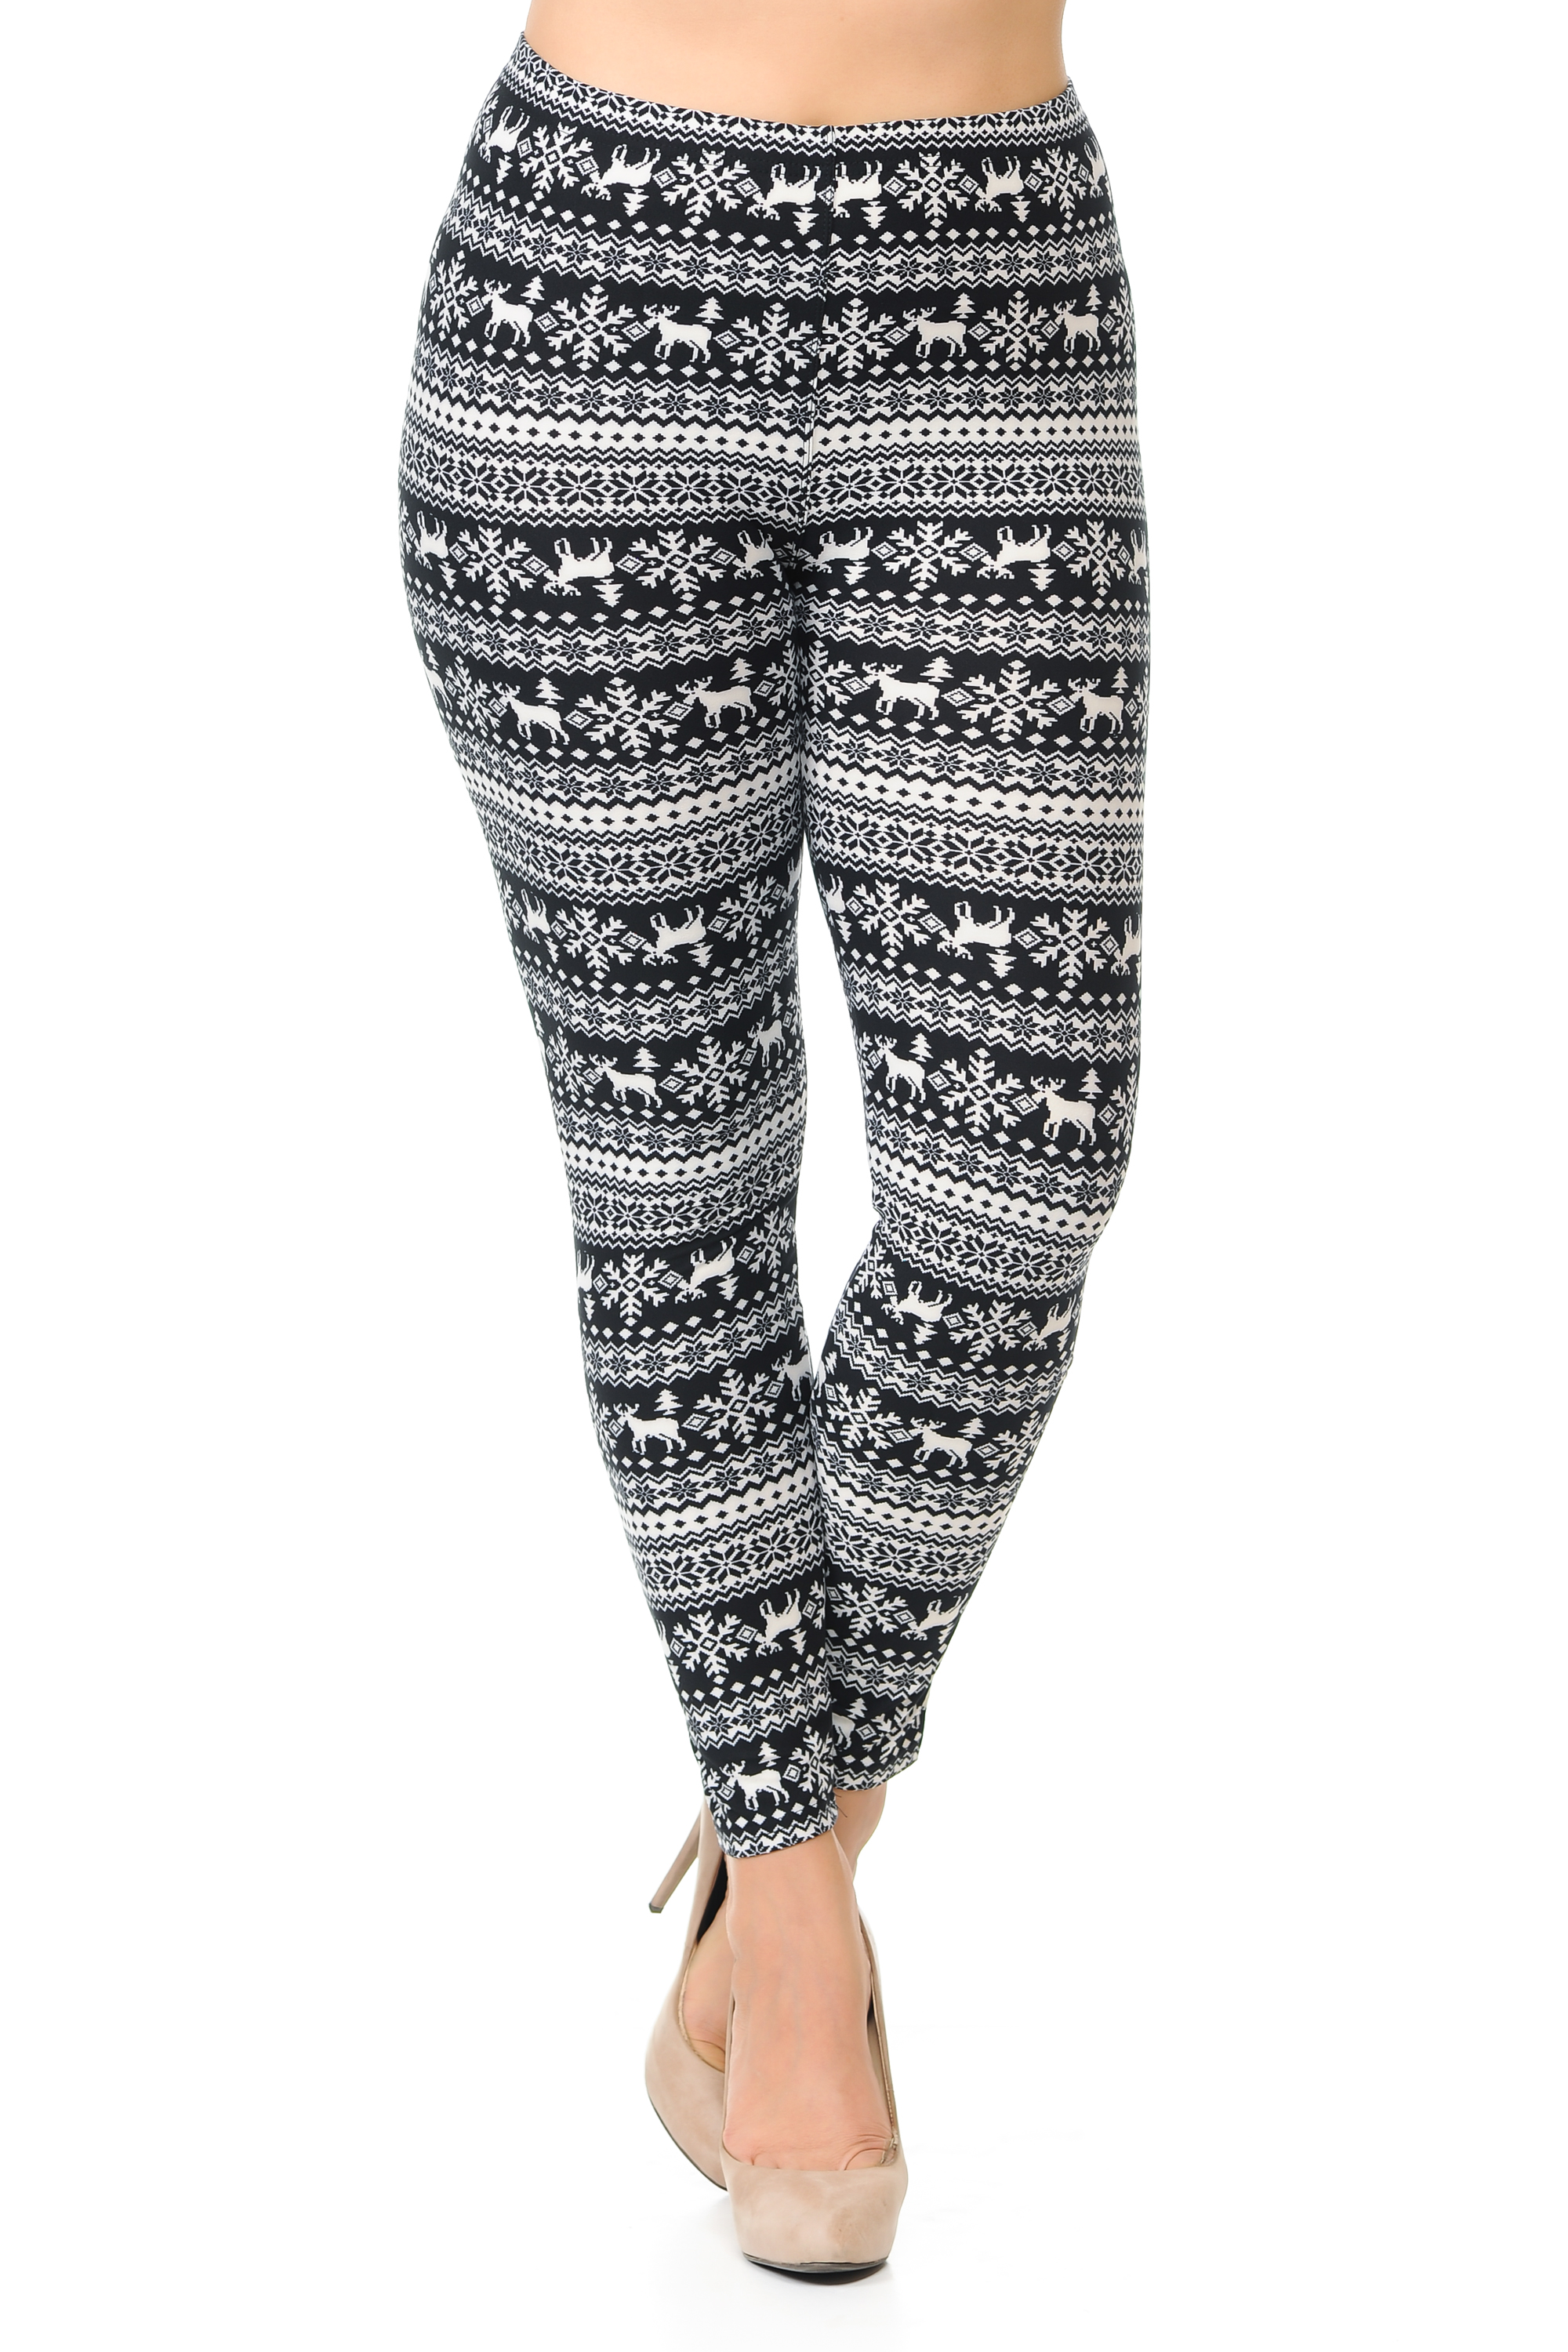 Wholesale Buttery Smooth  Reindeer and Snowflakes Christmas Extra Plus Size Leggings - 3X-5X